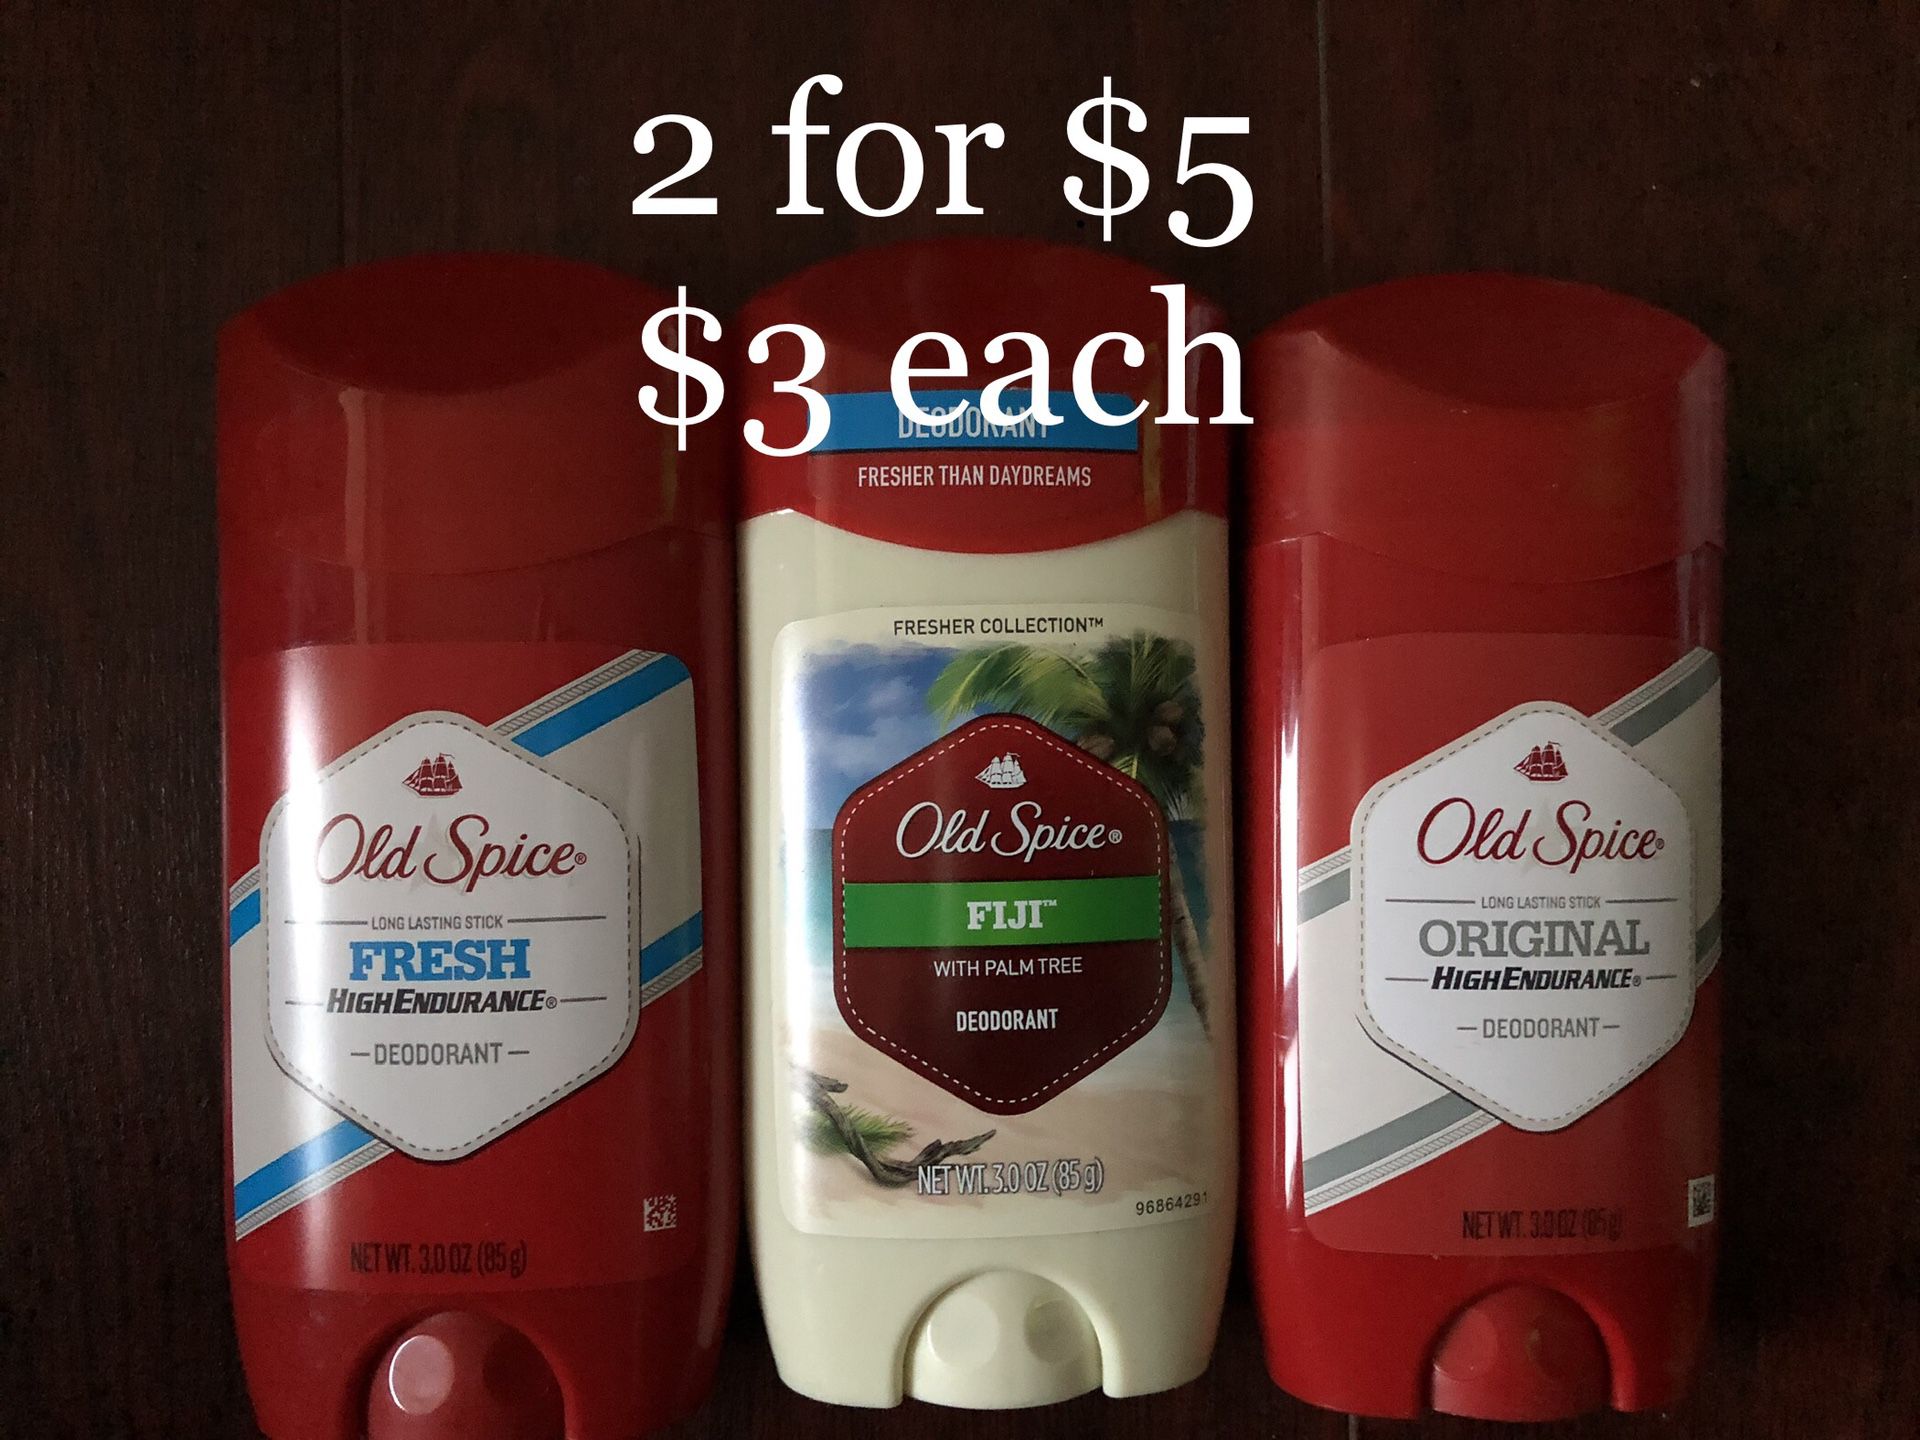 Old Spice Deodorant $3 each or 2 for $5